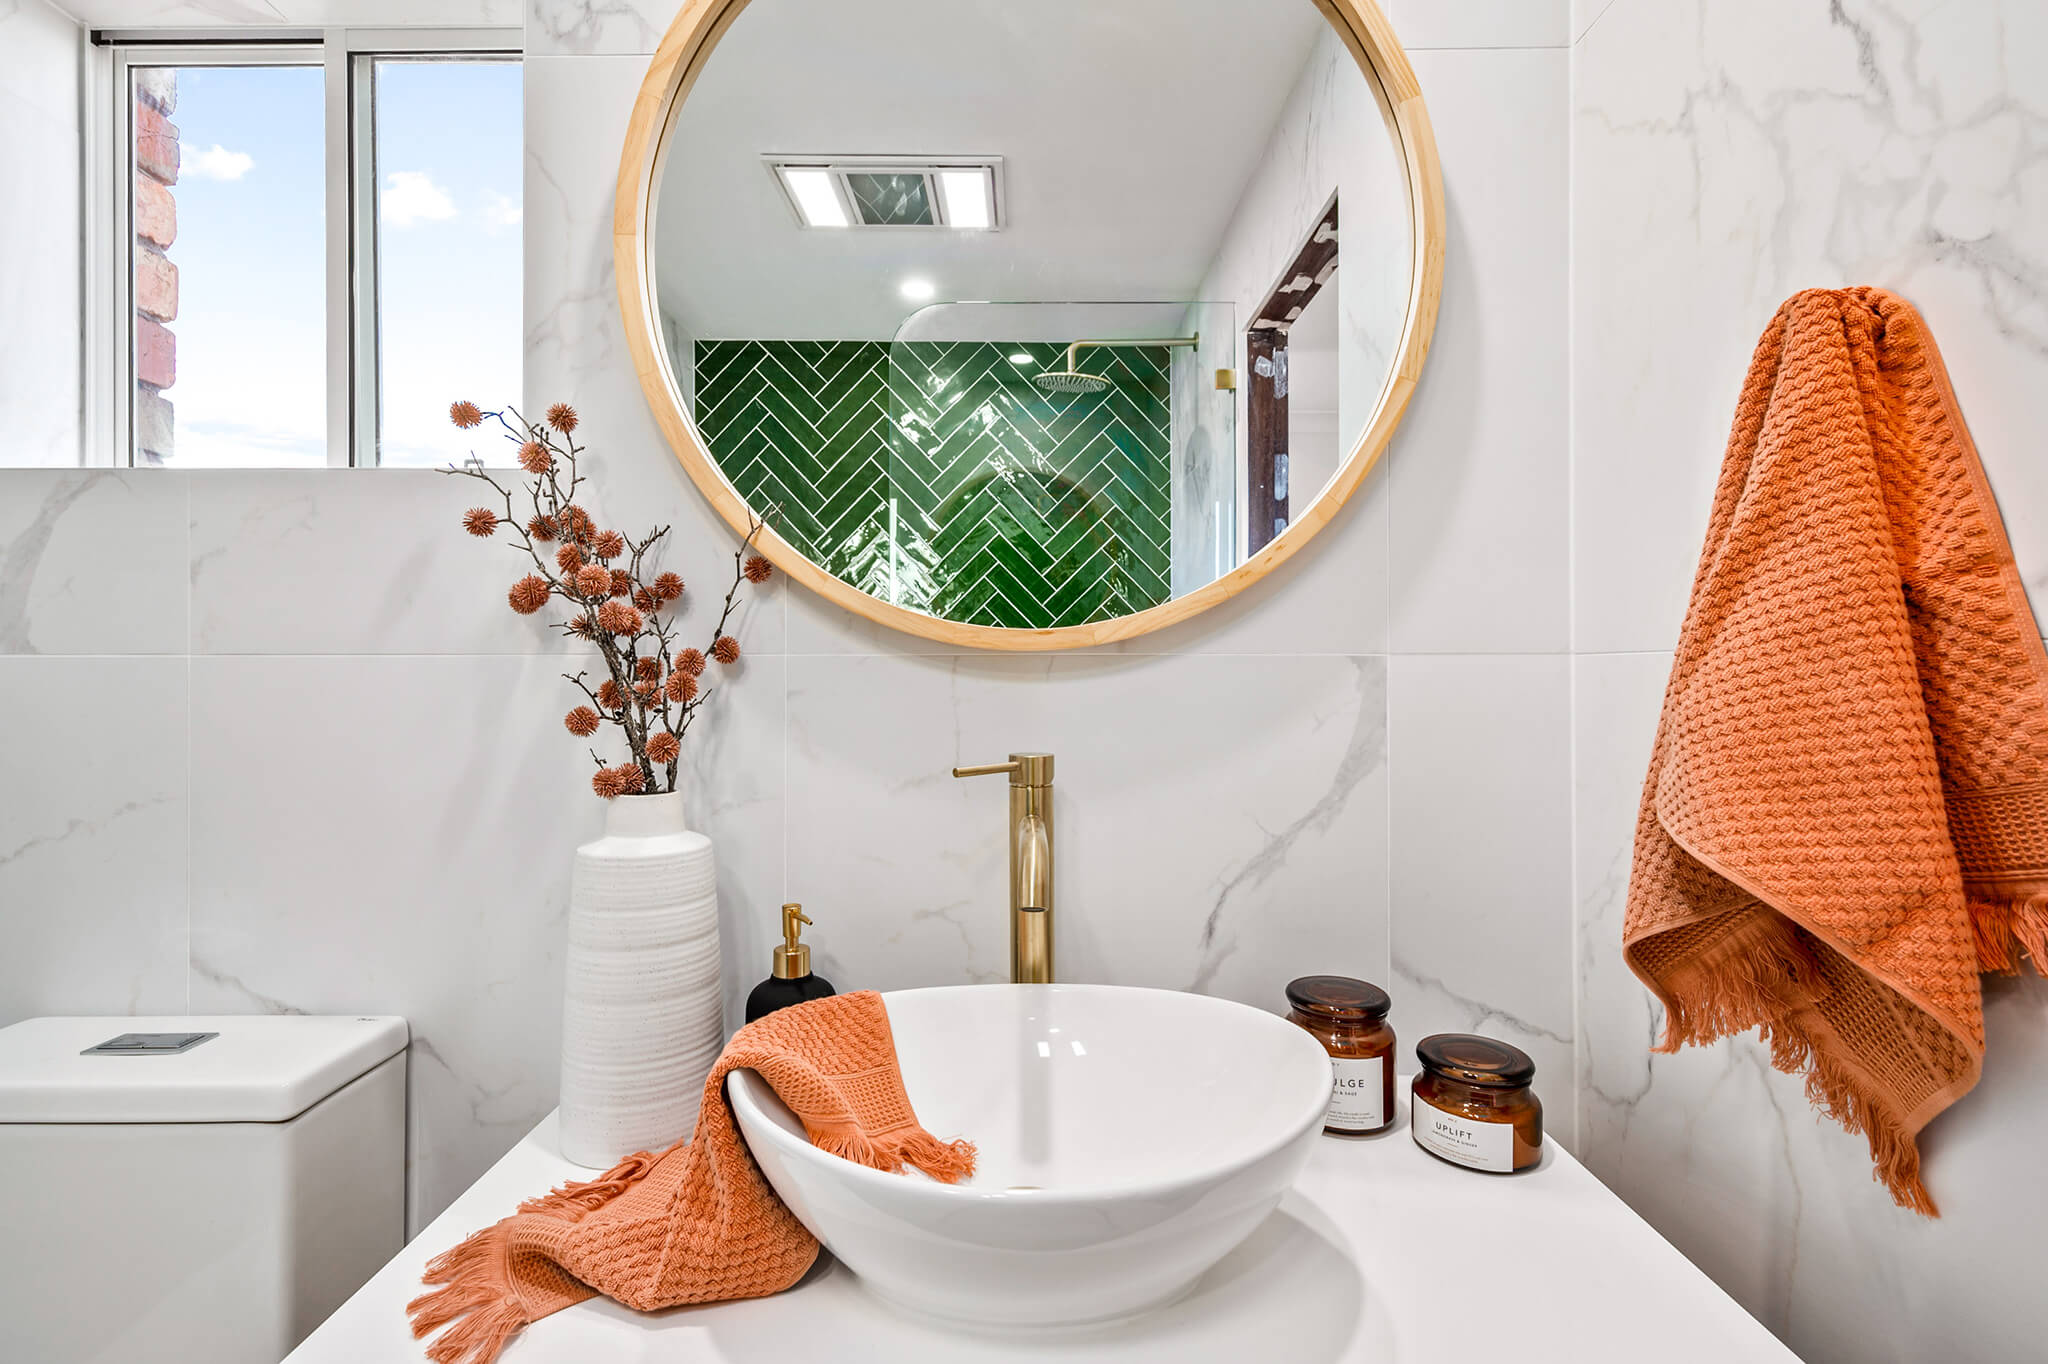 Sydney's Renovation Revolution The Latest Trends in Bathroom Makeovers!